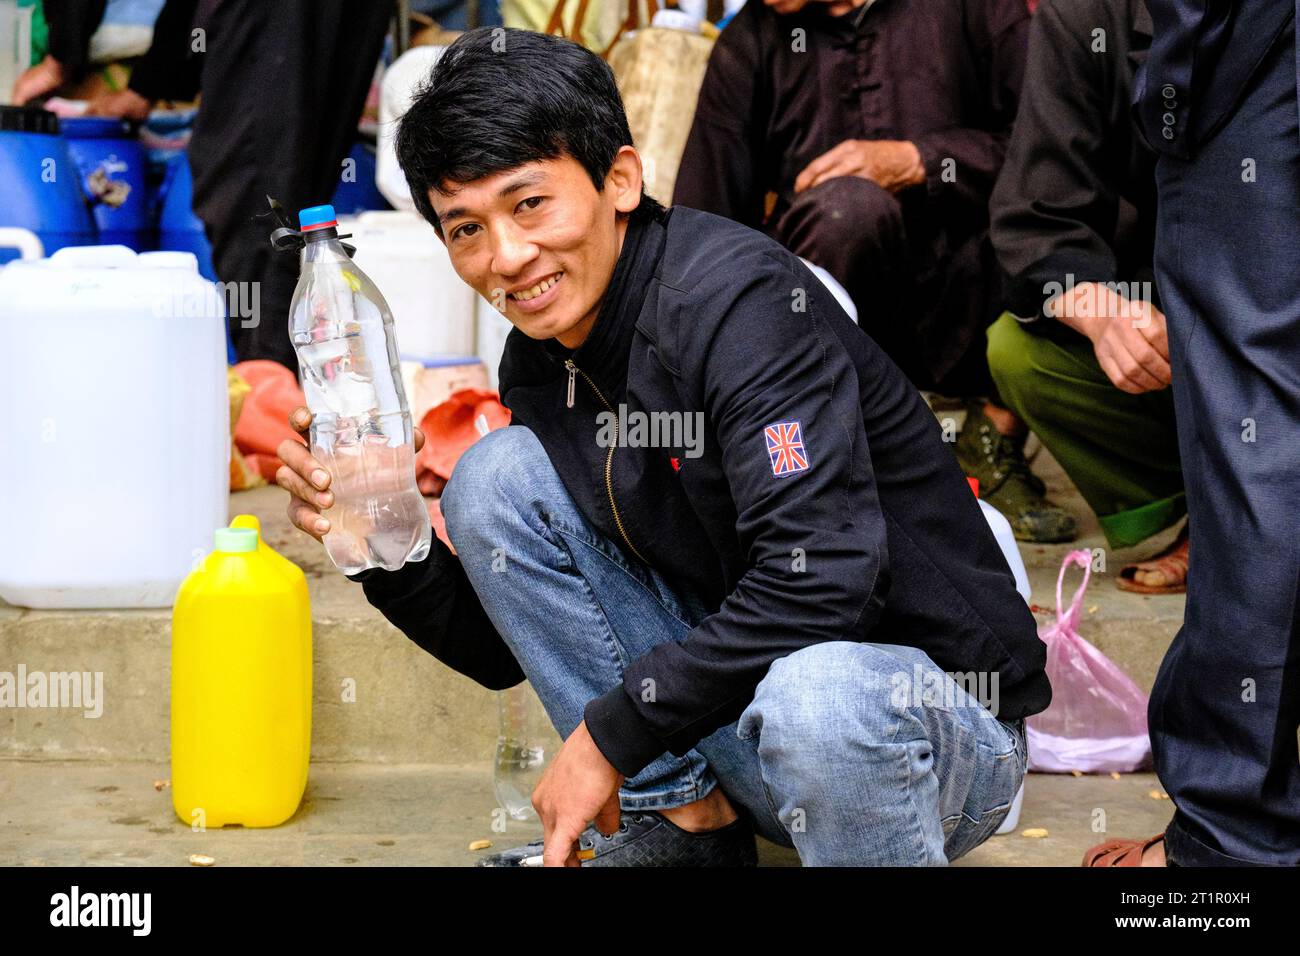 Bac Ha, Vietnam. Sunday Market Scene. Young Man Offering Home-made Alcoholic Beverage for Sale.  Lao Cai Province. Stock Photo